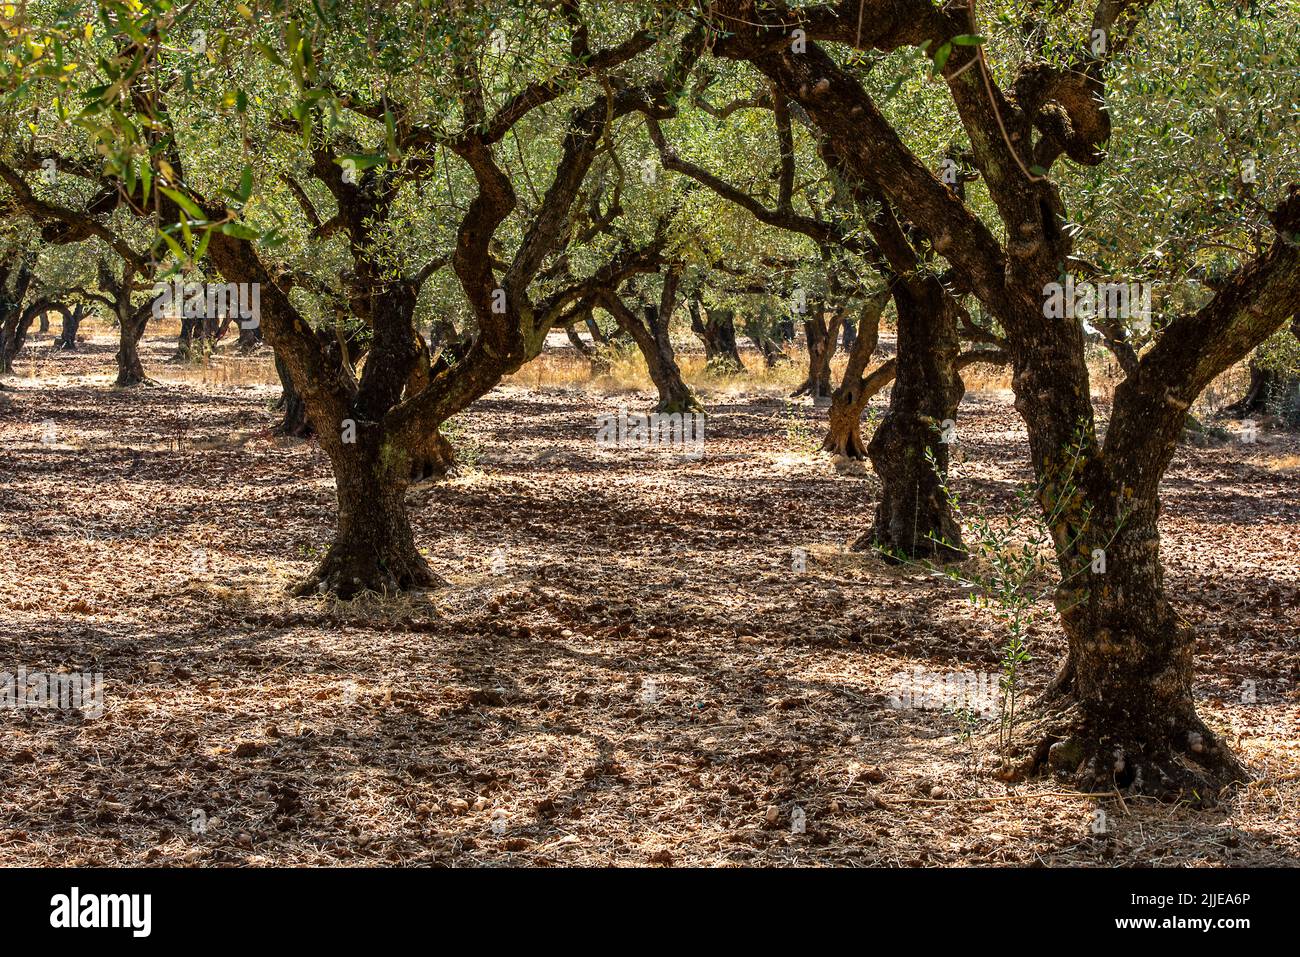 olive trees, olive grove, zante, zakynthos, greek islands, olive oil production, oliver trees in an olive grove on the greek island of zakynthos. Stock Photo